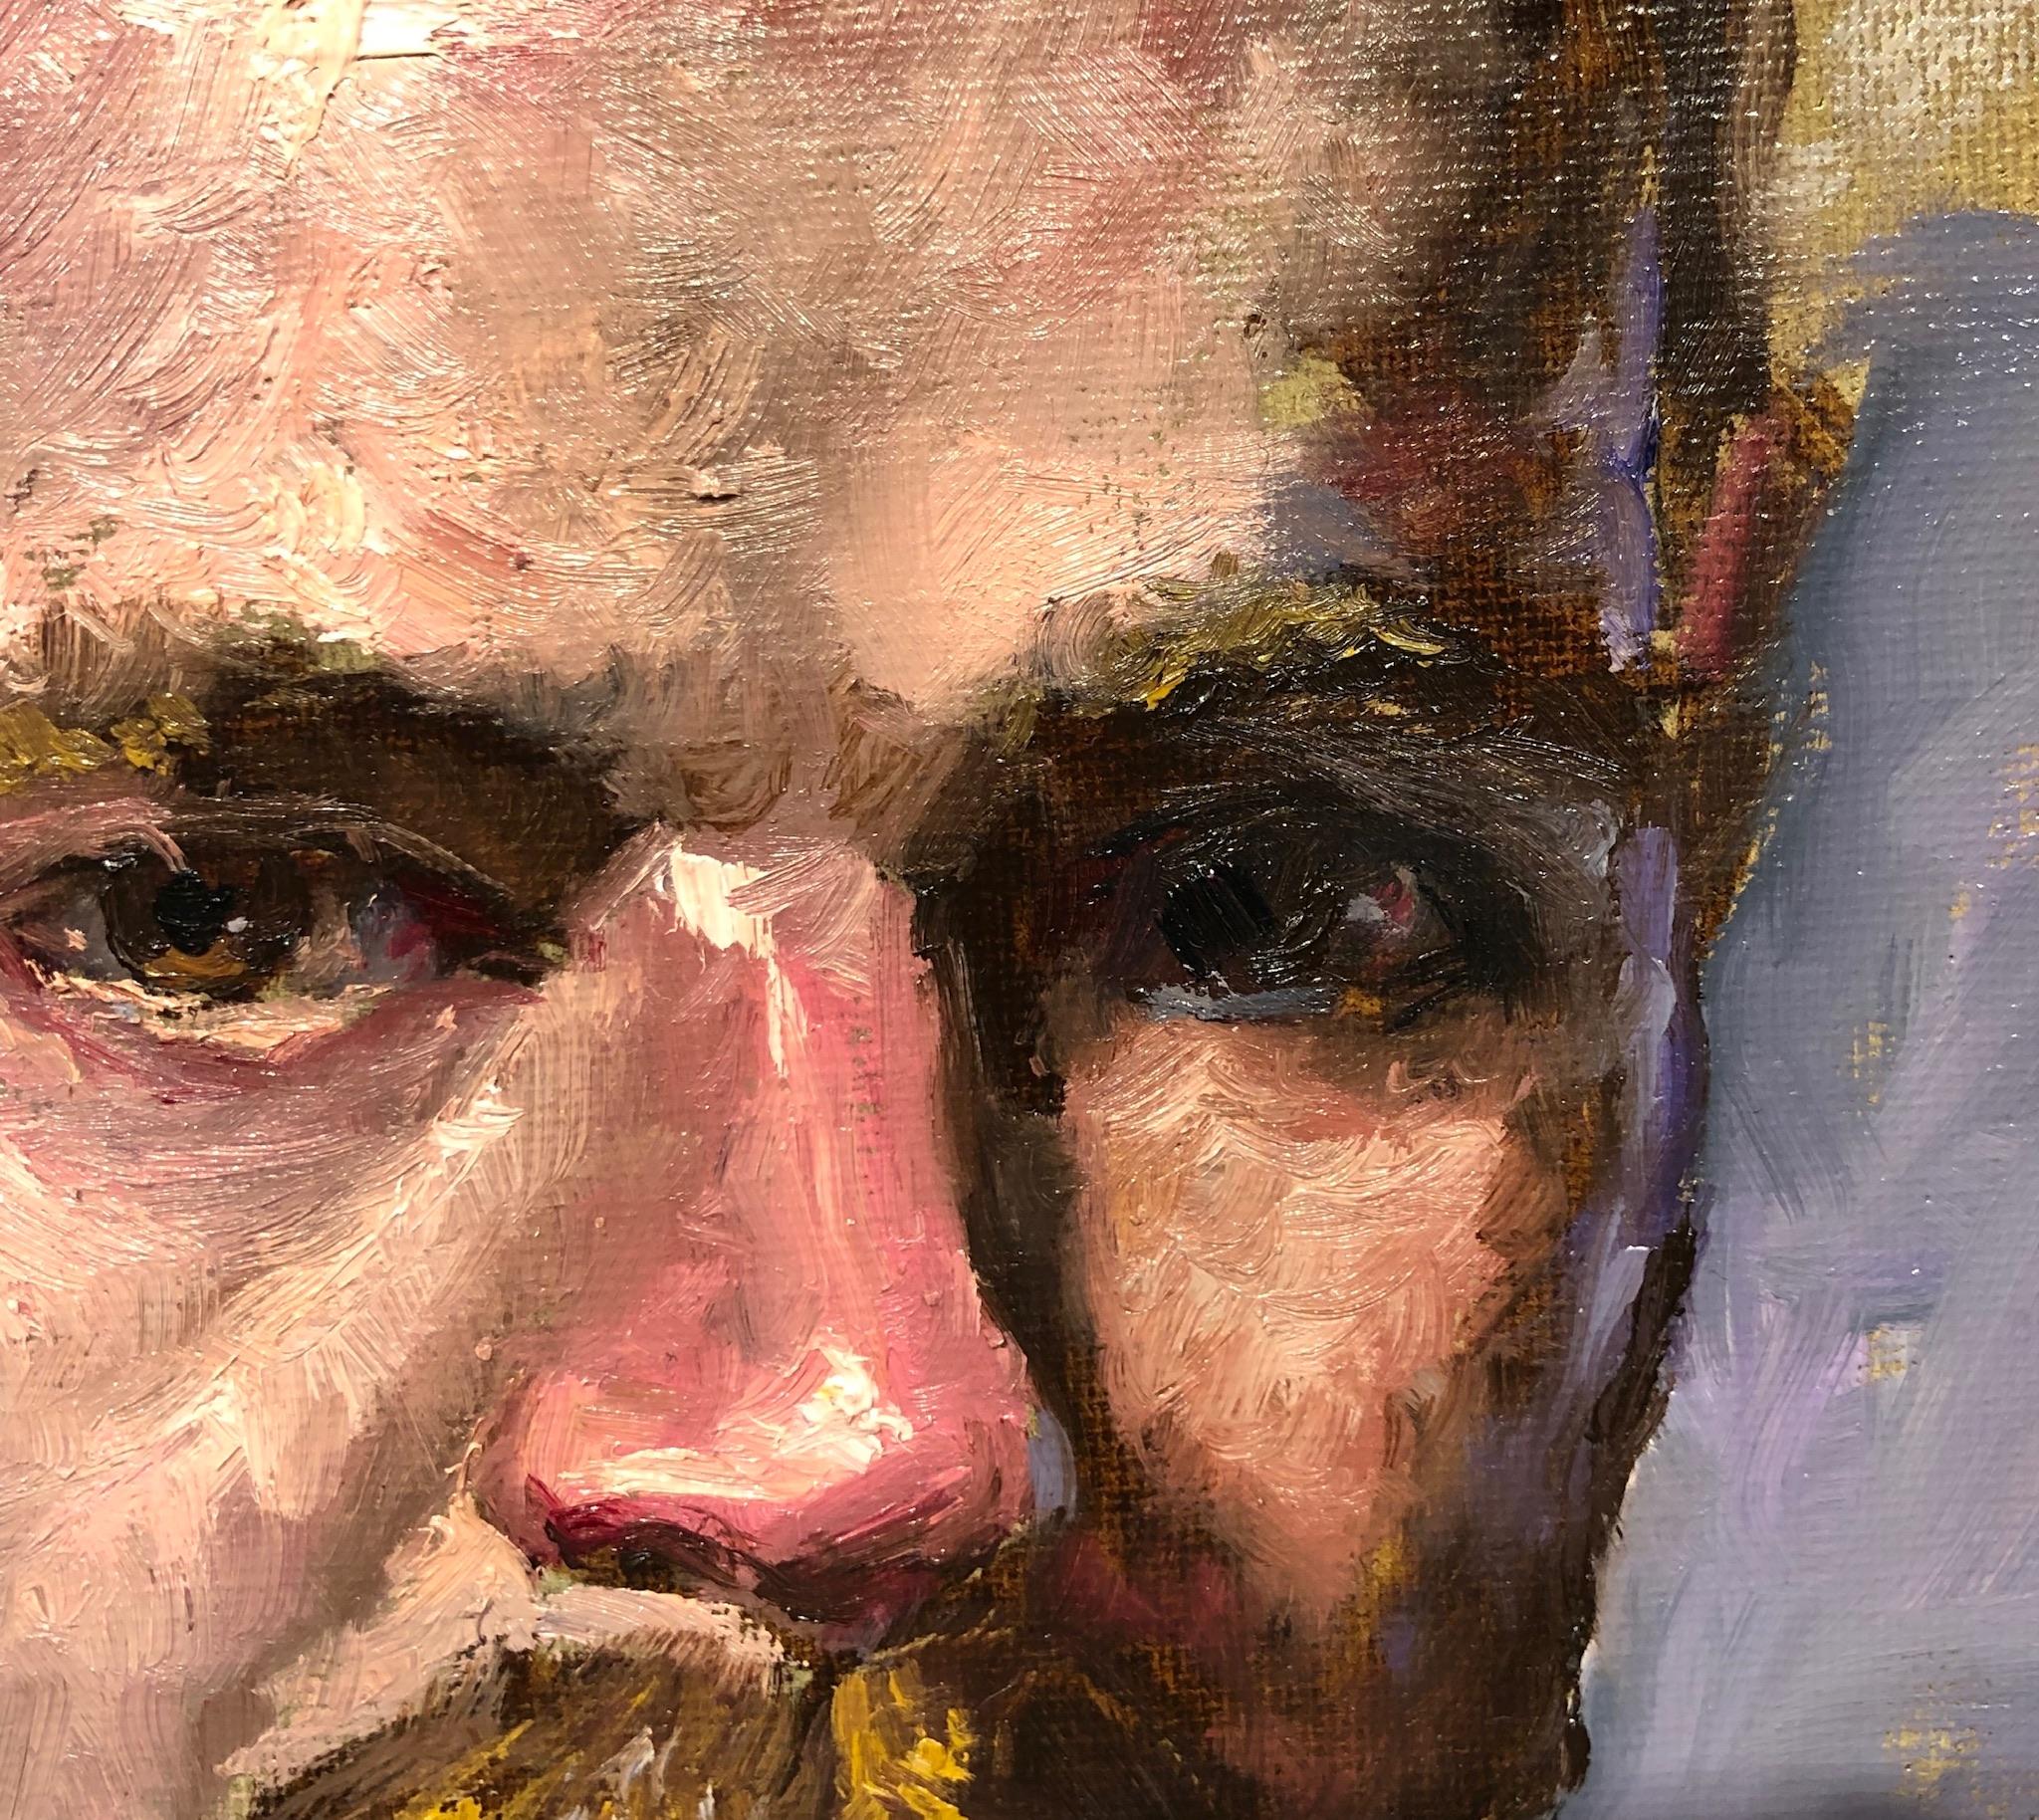 Doug, Male Figure with Tattoos, Full Beard and Mustache, Oil on Canvas, Framed - Brown Portrait Painting by Peter Lupkin